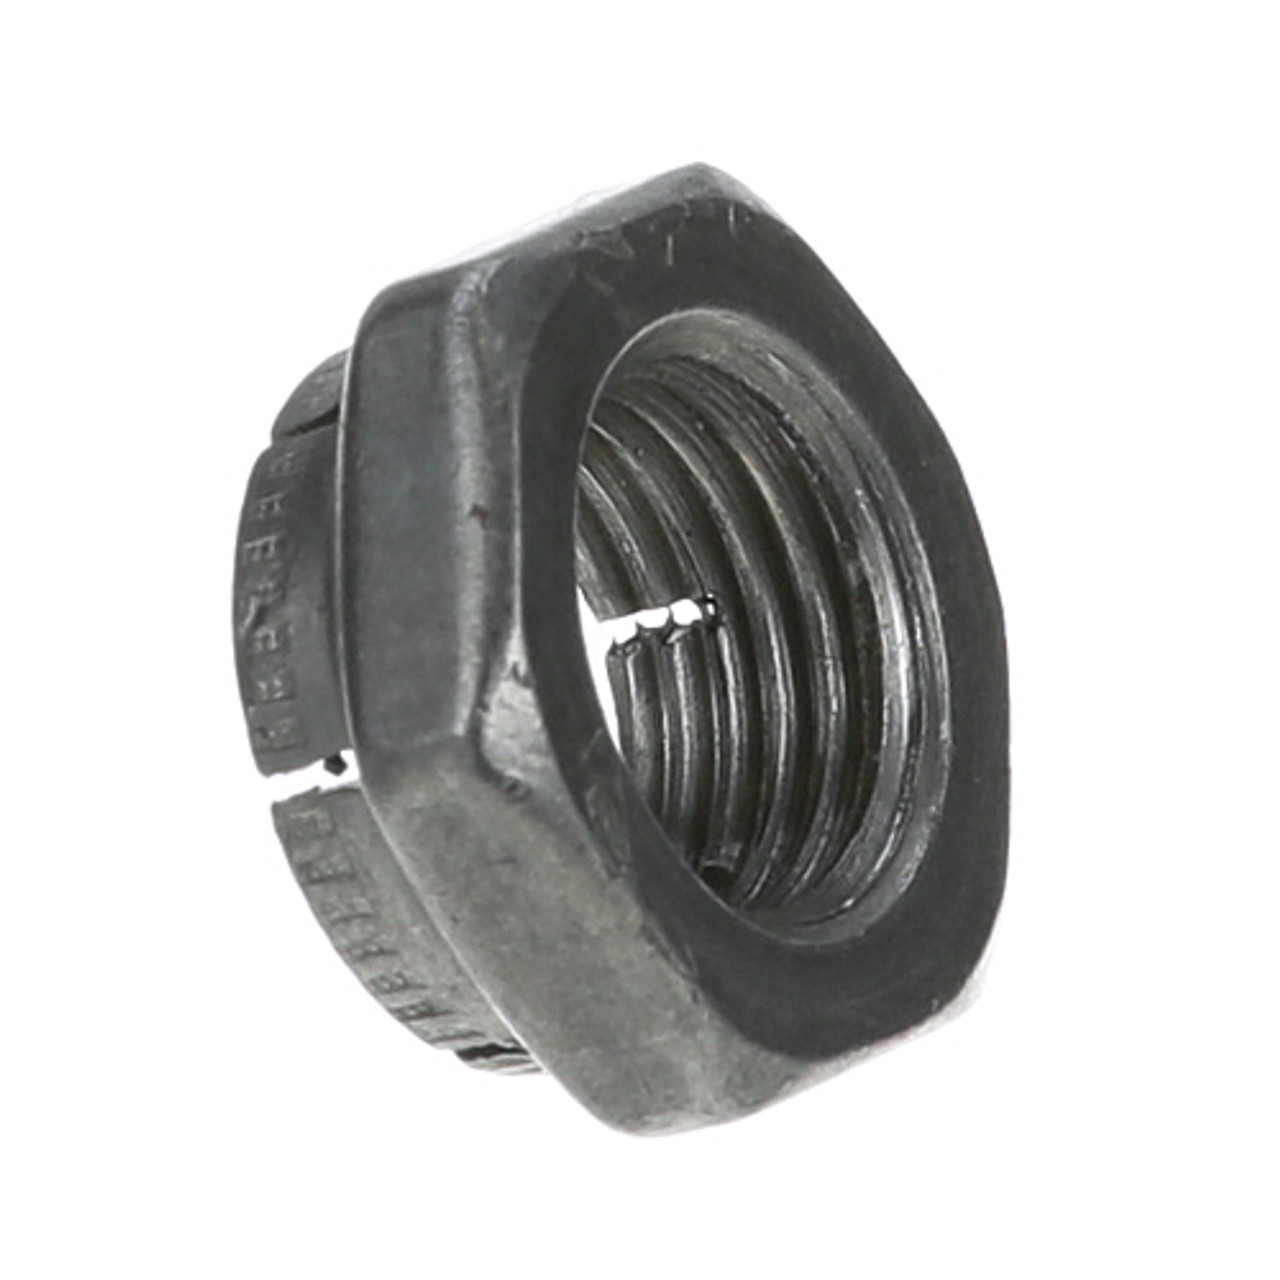 Stop Nut - Replacement Part For Hobart NS32-29